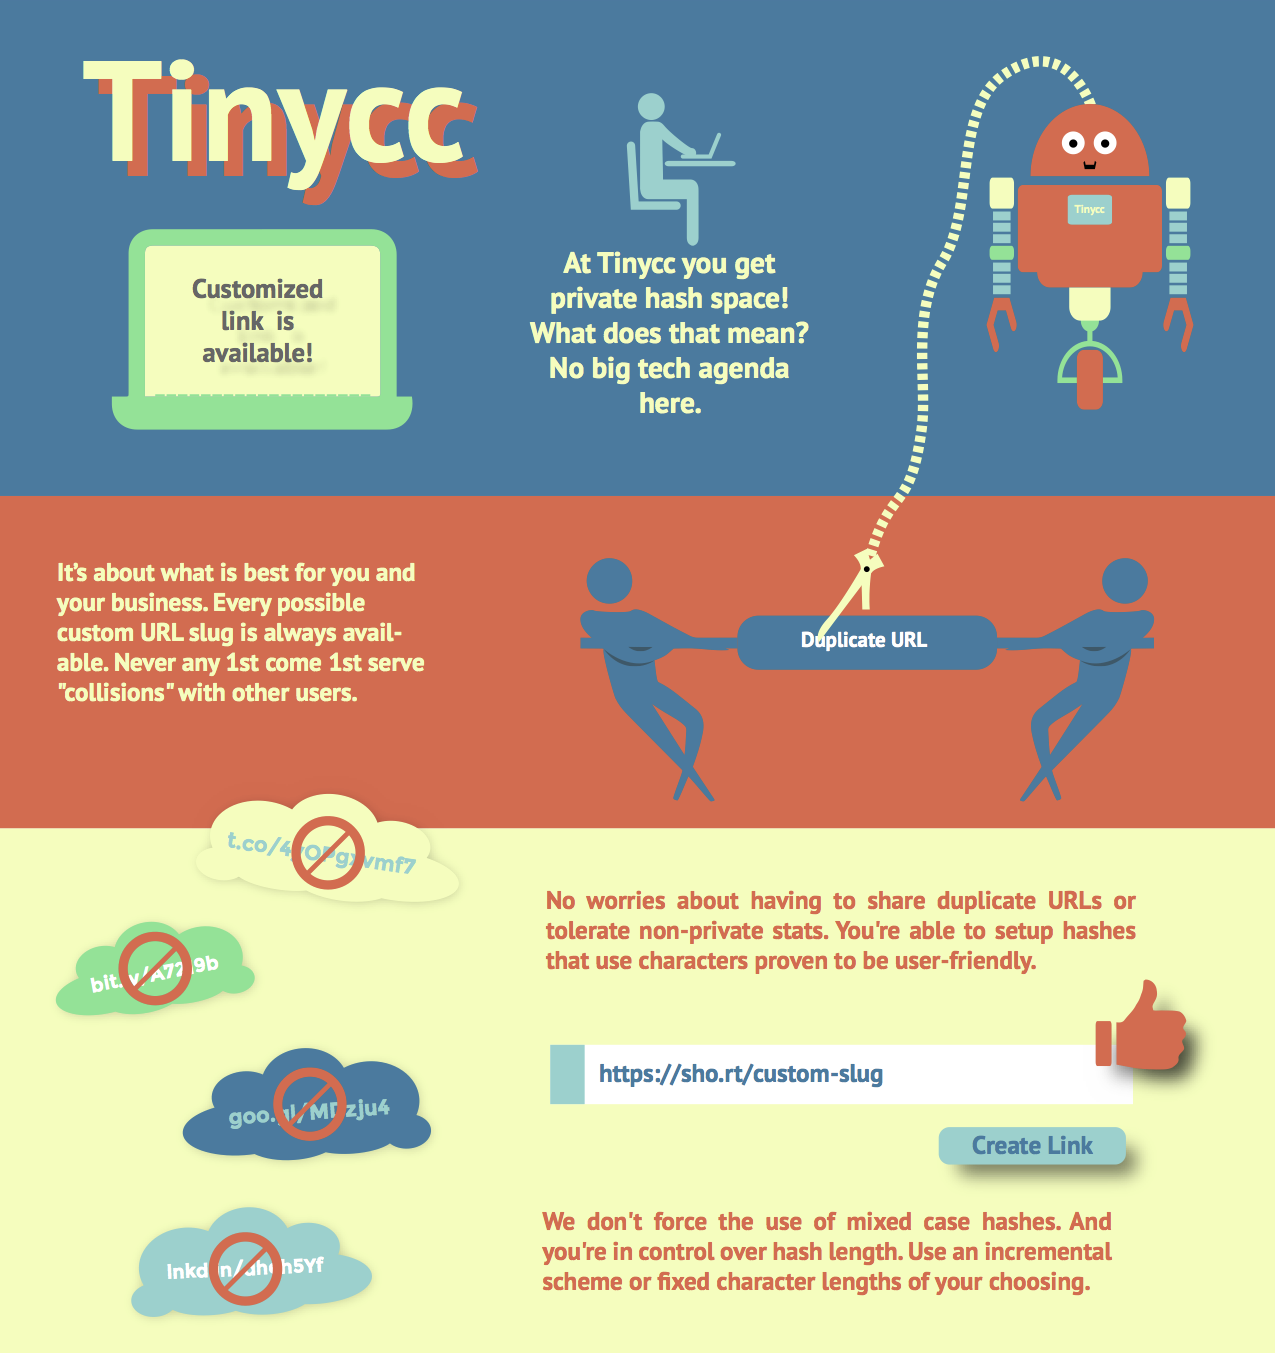 Why Tinycc is a better URL shortener